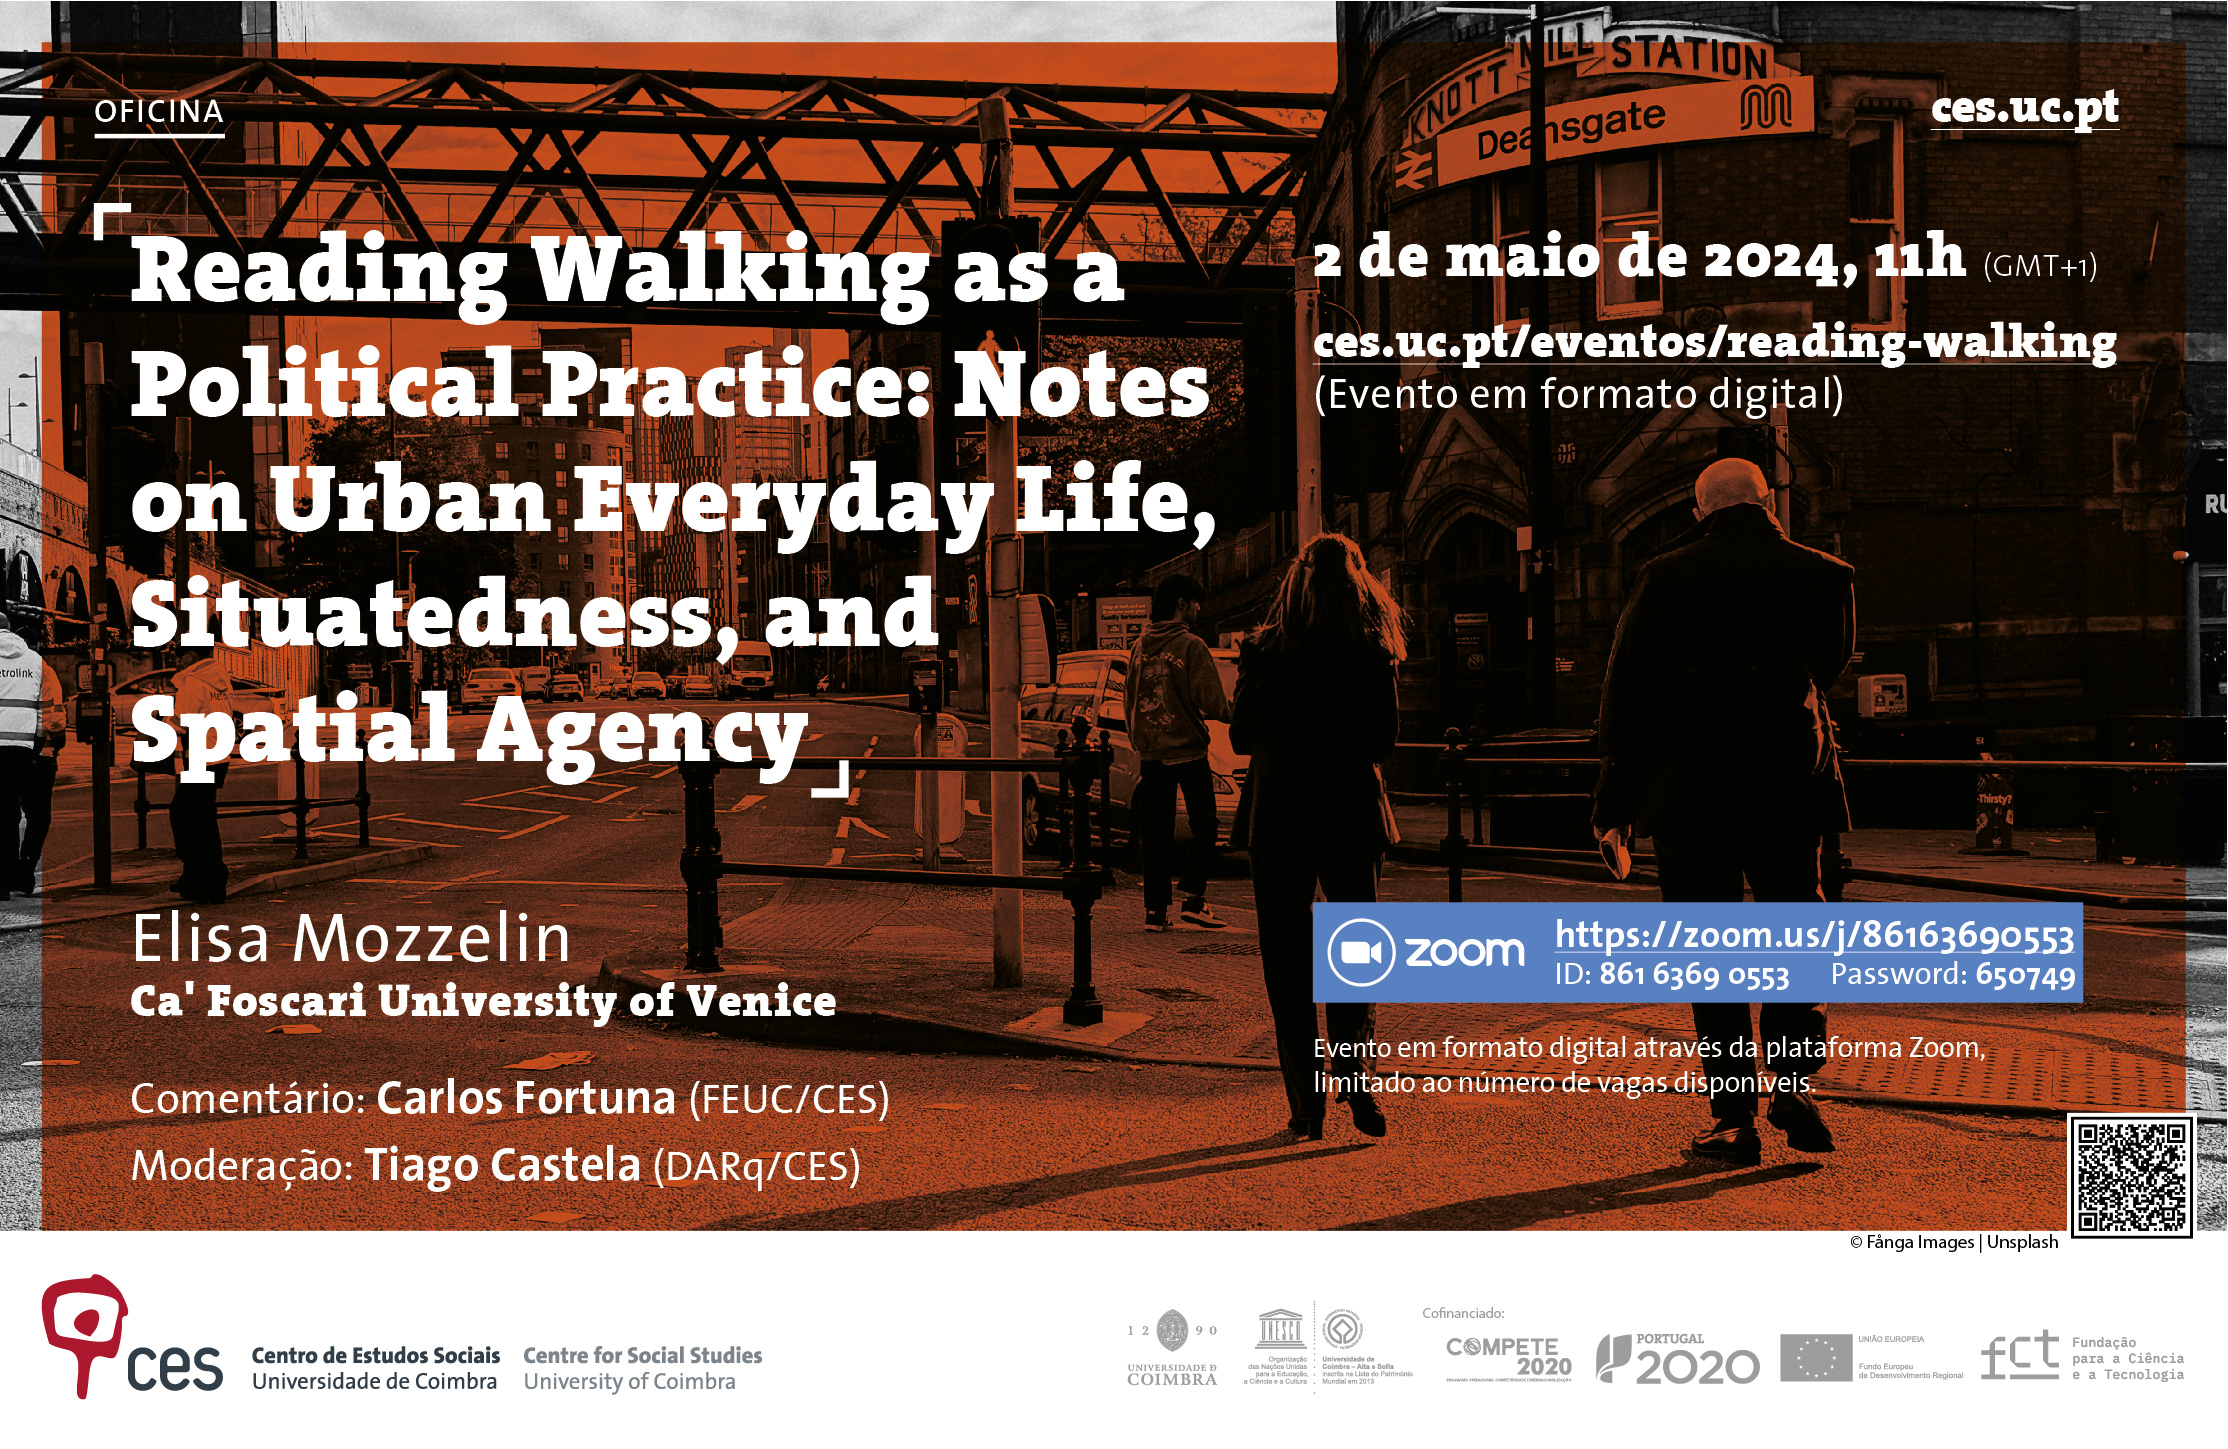 Reading Walking as a Political Practice: Notes on Urban Everyday Life, Situatedness, and Spatial Agency<span id="edit_45581"><script>$(function() { $('#edit_45581').load( "/myces/user/editobj.php?tipo=evento&id=45581" ); });</script></span>